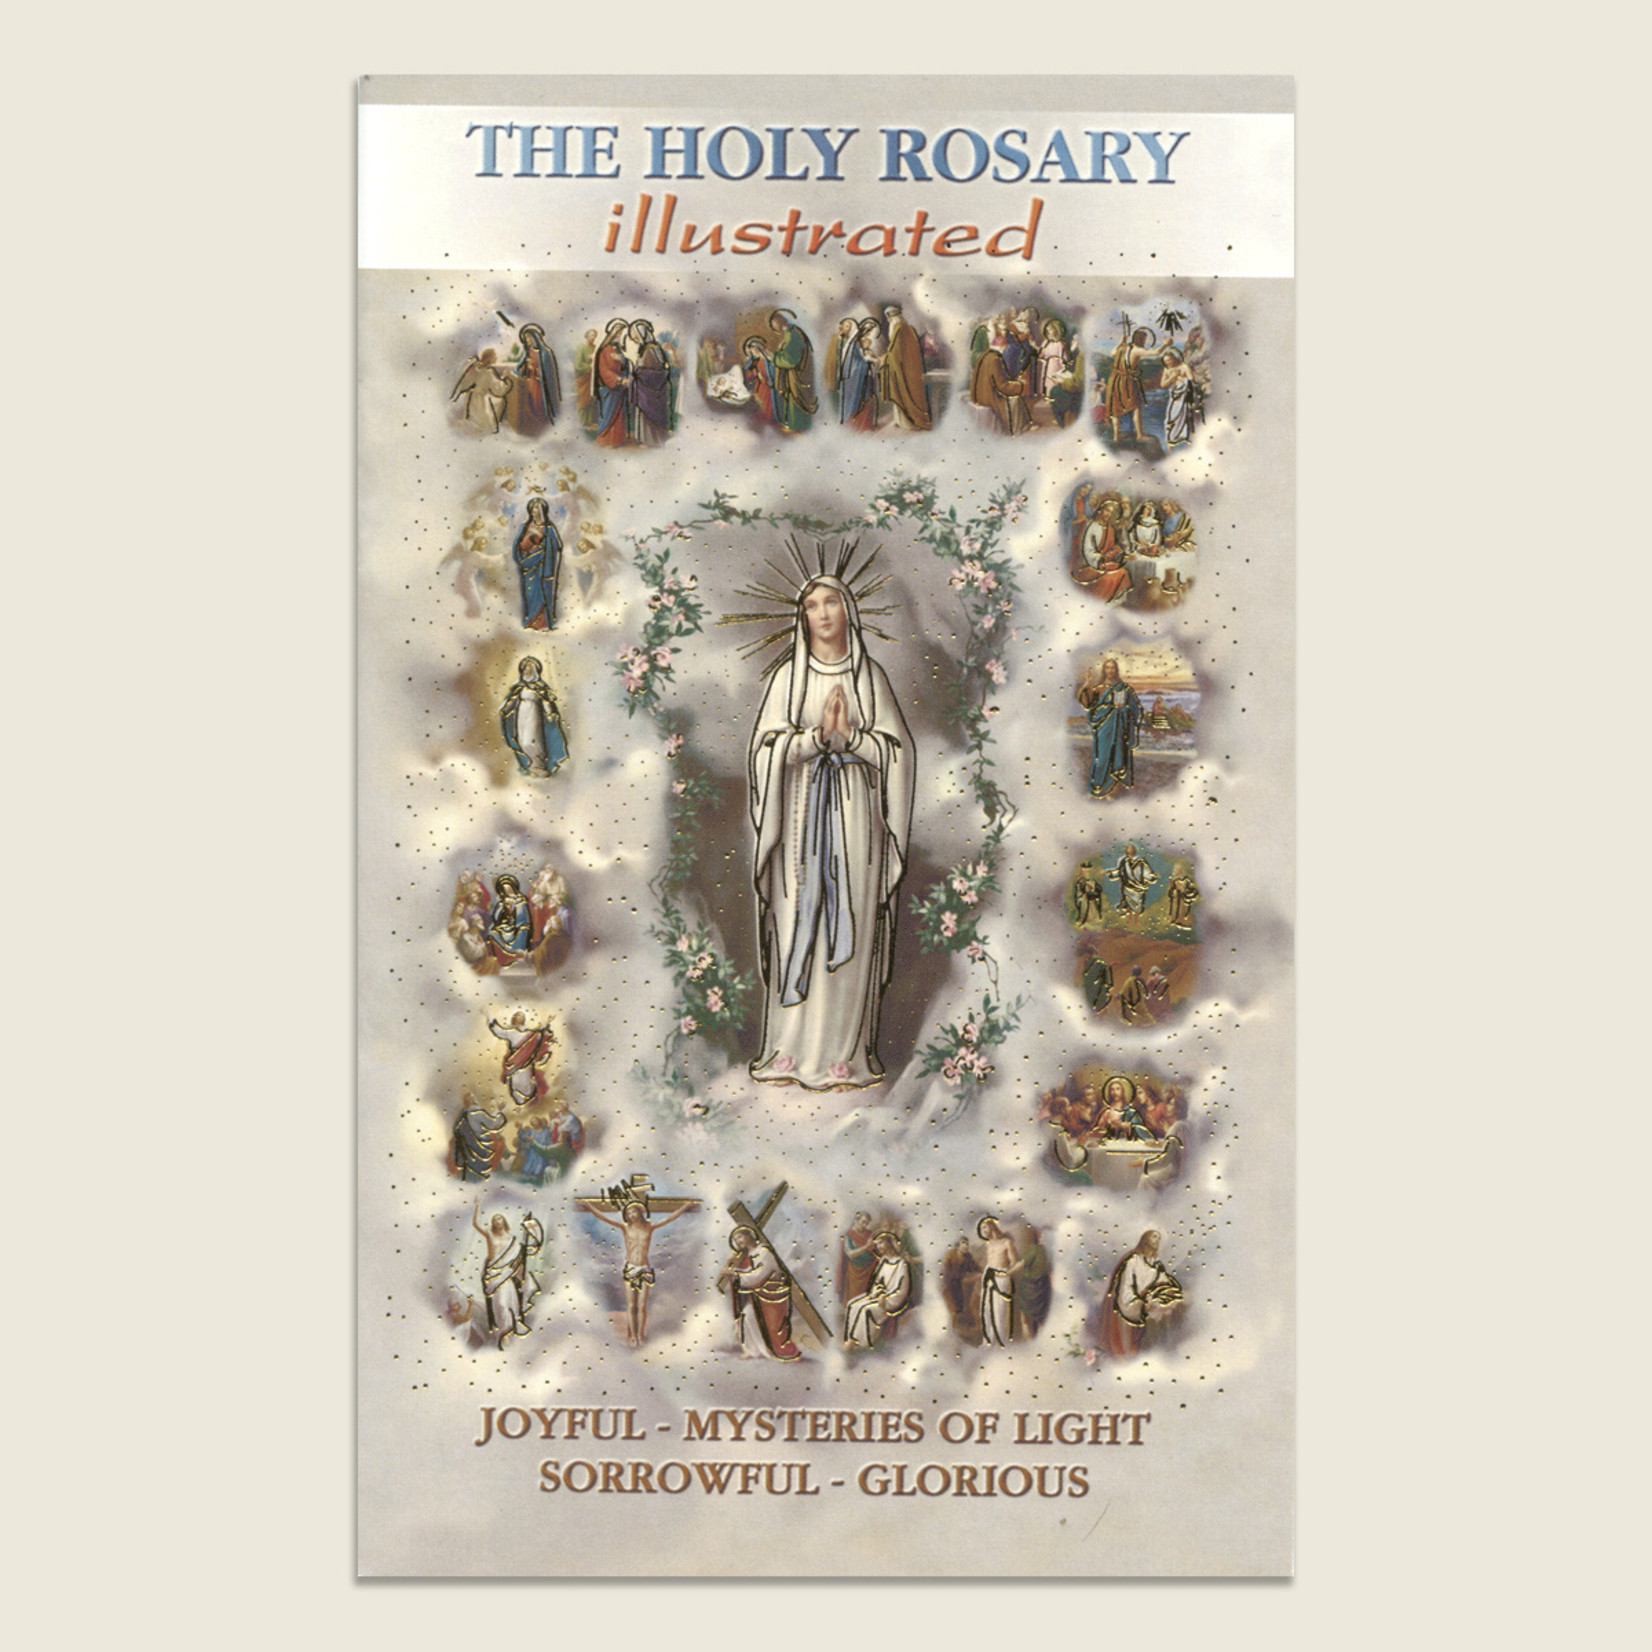 HR-01 - The Holy Rosary Illustrated